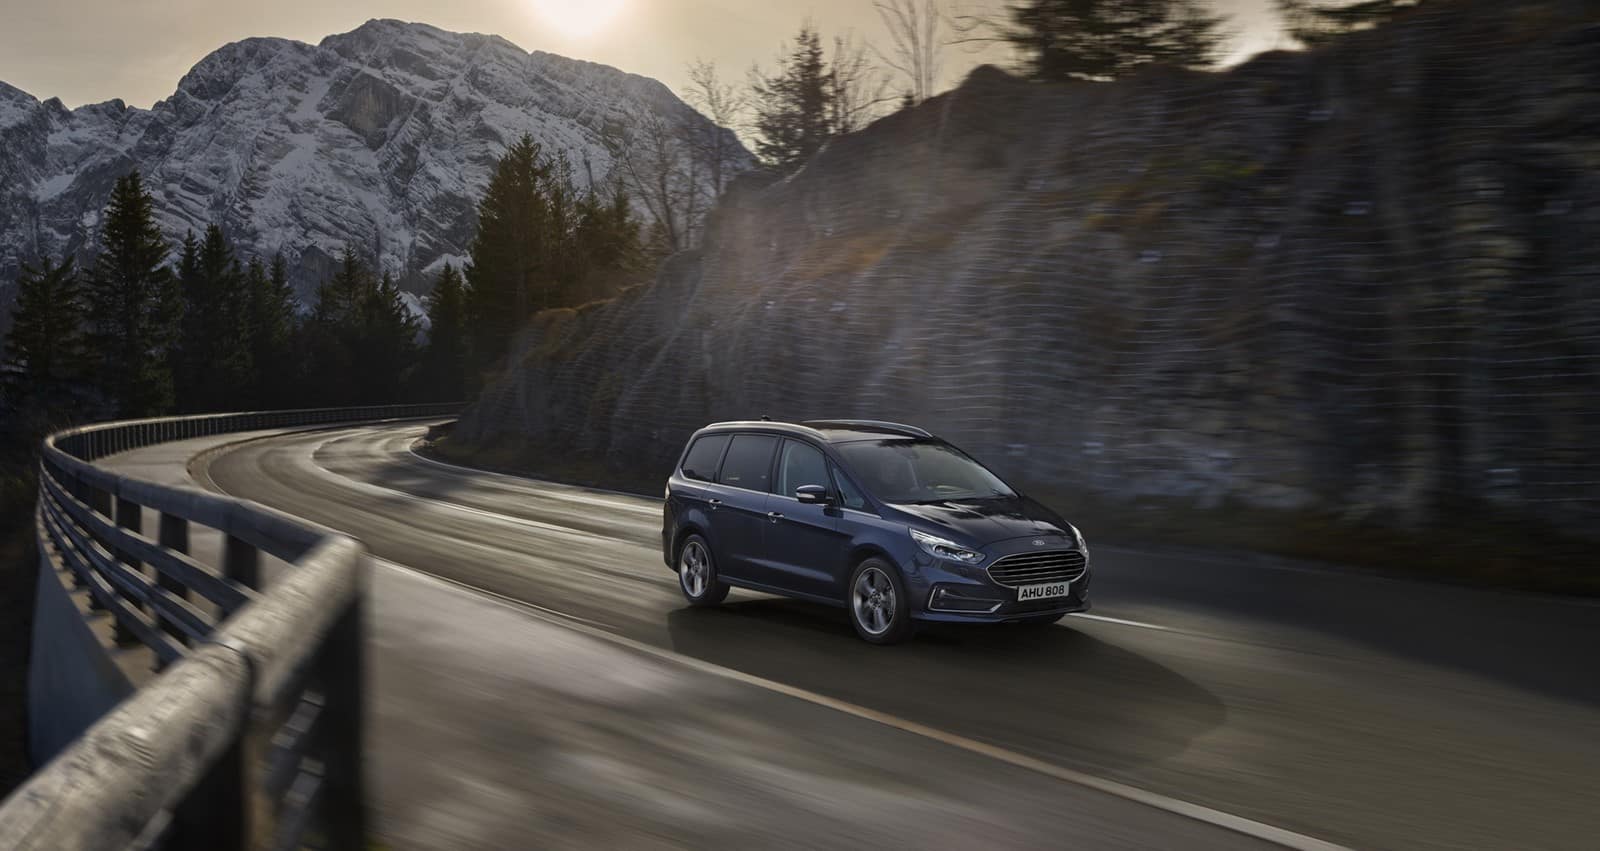 New images of the Ford S-Max and Galaxy hybrids: already available in Spain